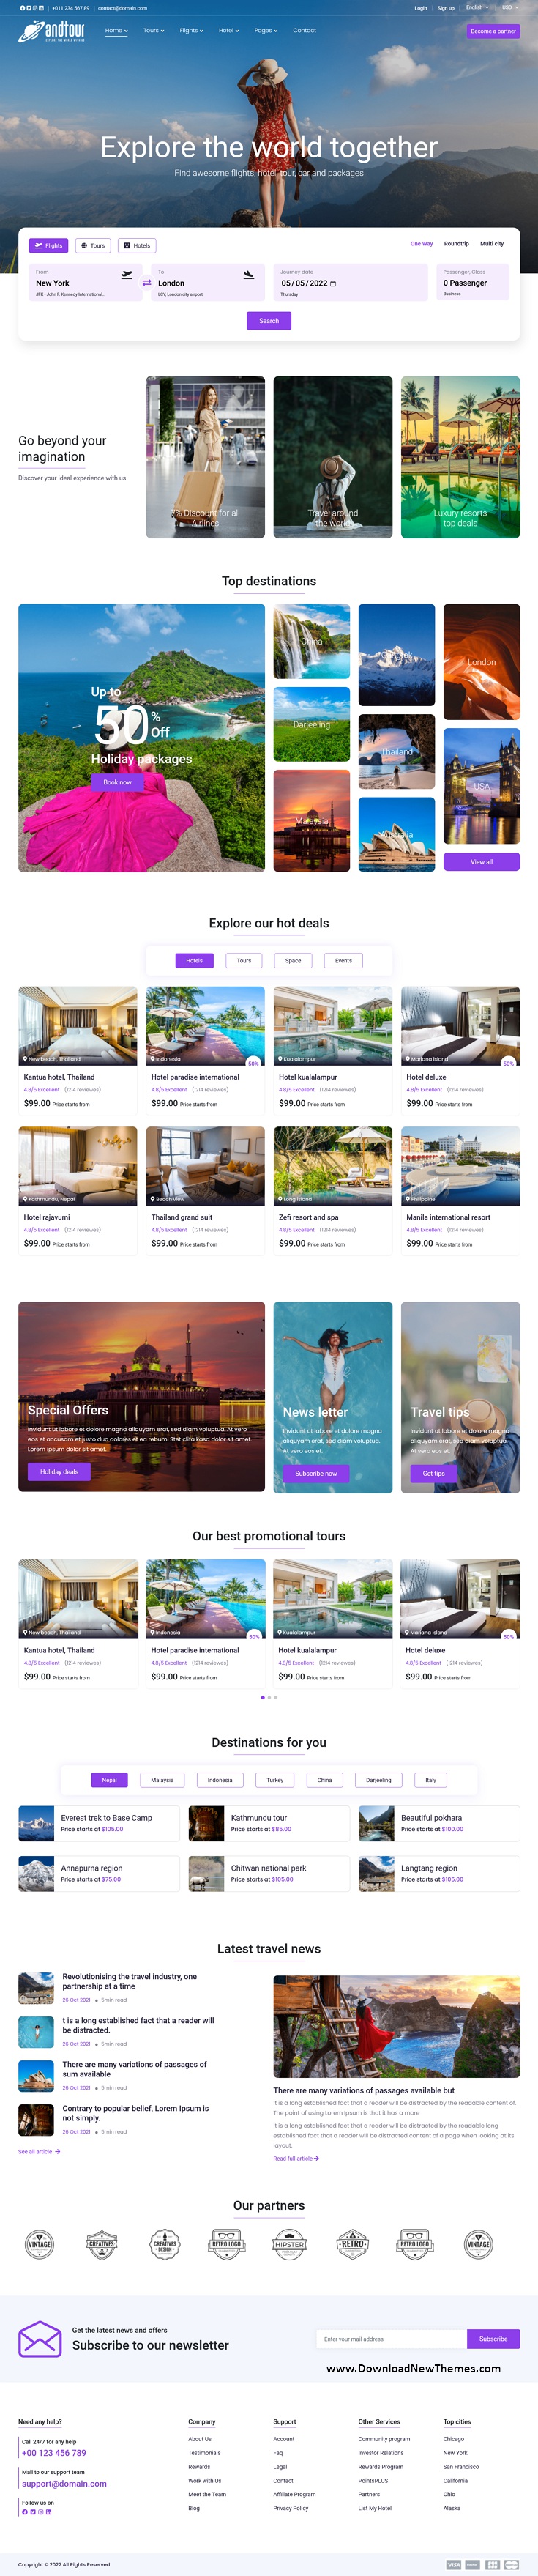 AndTour - Travel Agency Vue Js Template Review